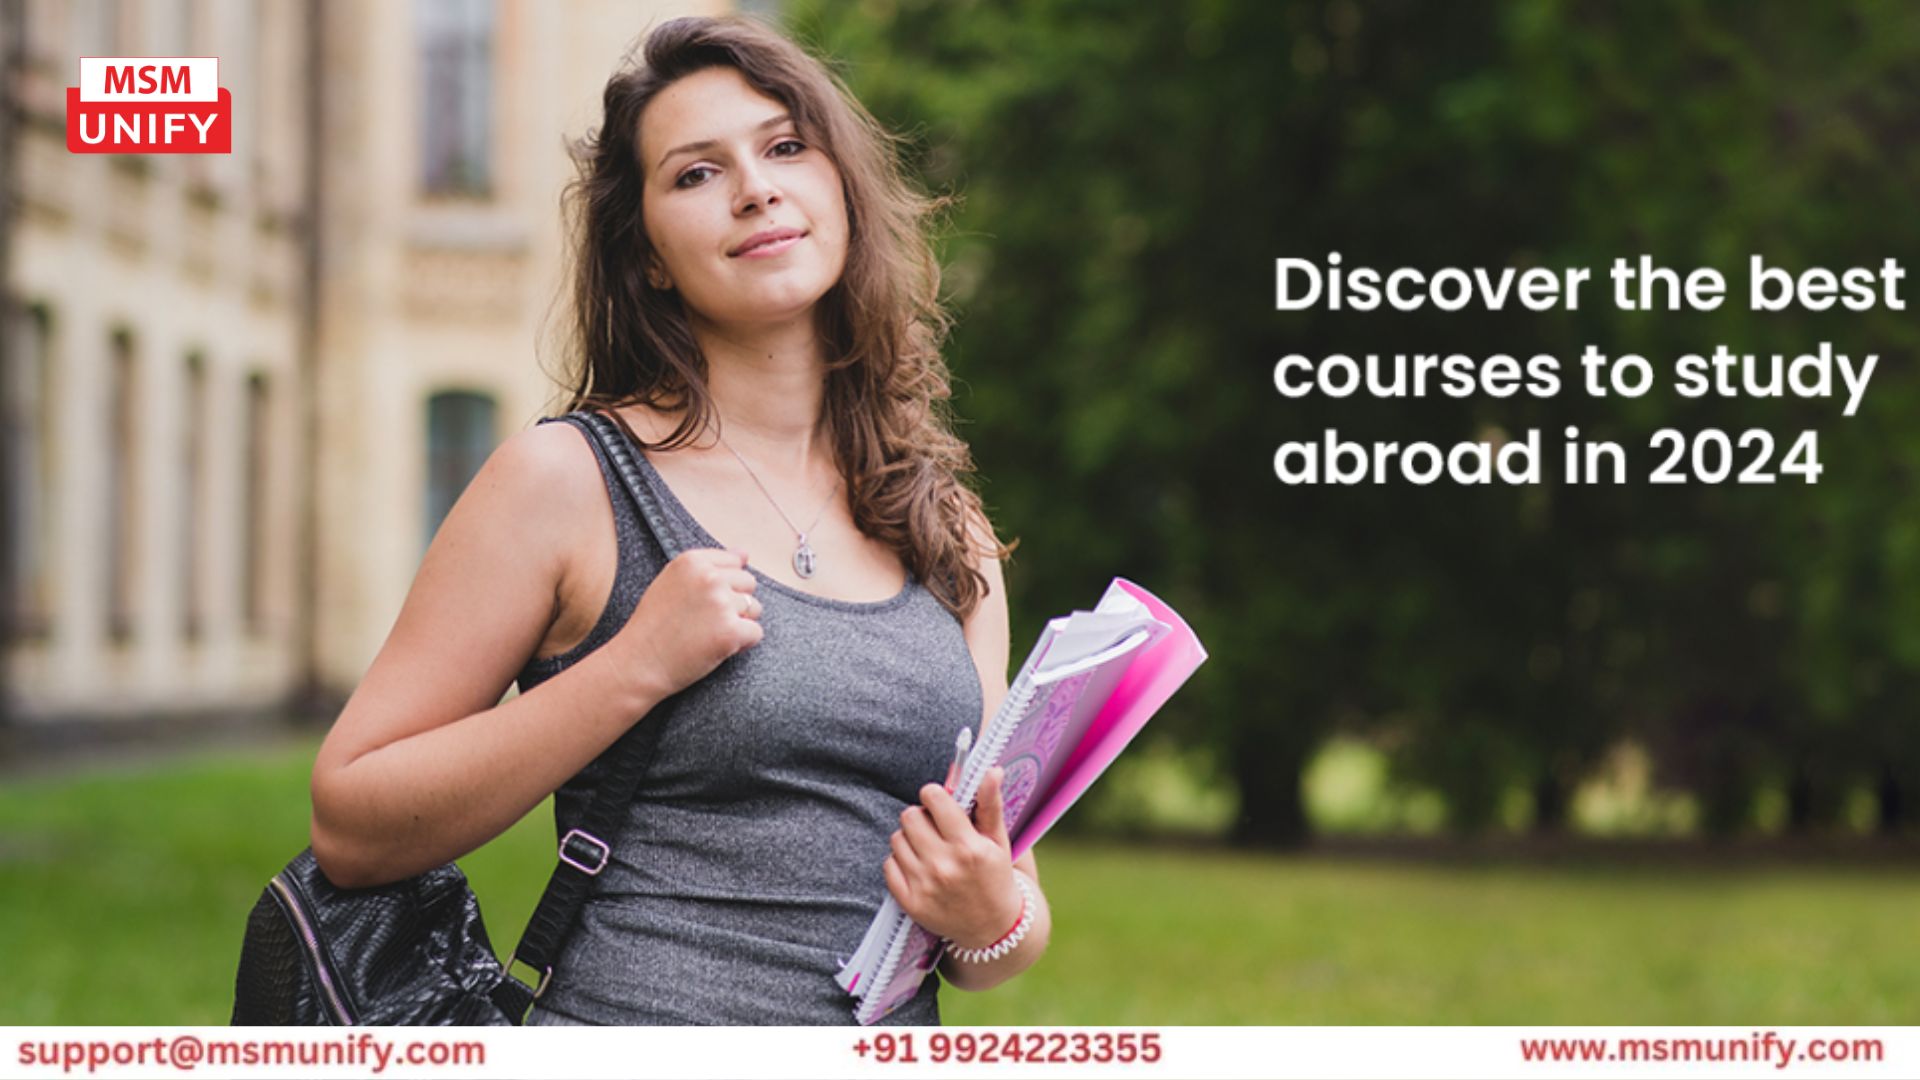 Explore a world of possibilities with our curated list of the <a href="https://www.msmunify.com/blogs/best-courses-to-study-abroad/">best courses to study abroad</a>. Elevate your education, embrace cultural diversity, and embark on a transformative journey. Click to find your perfect academic adventure!

